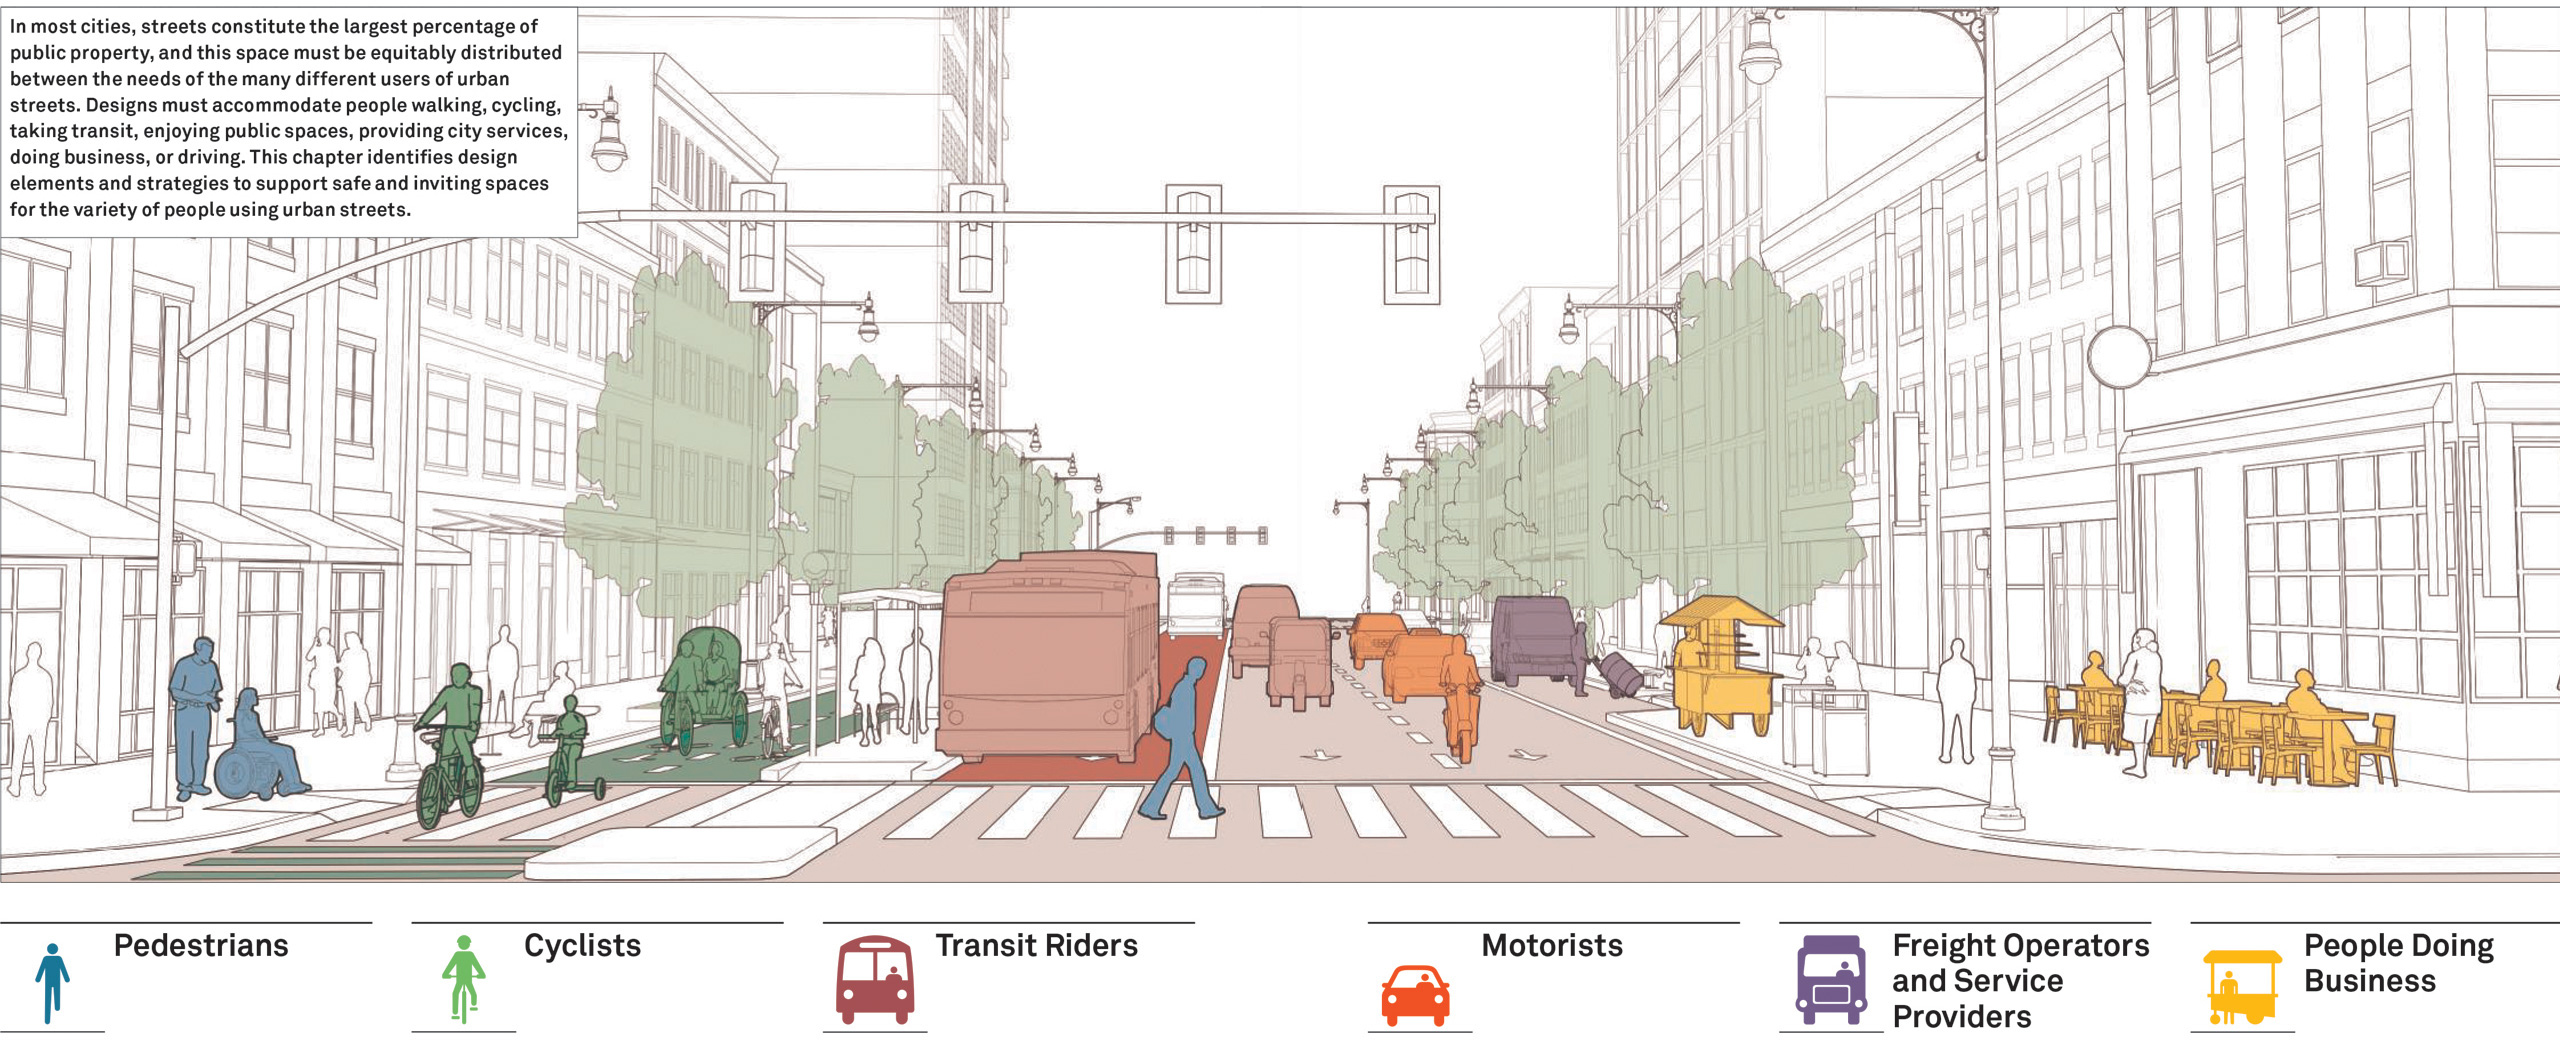 A diagram showing the different users of a public street: pedestrians, cyclists, transit riders, motorists, freight operators, service providers, and people doing business.